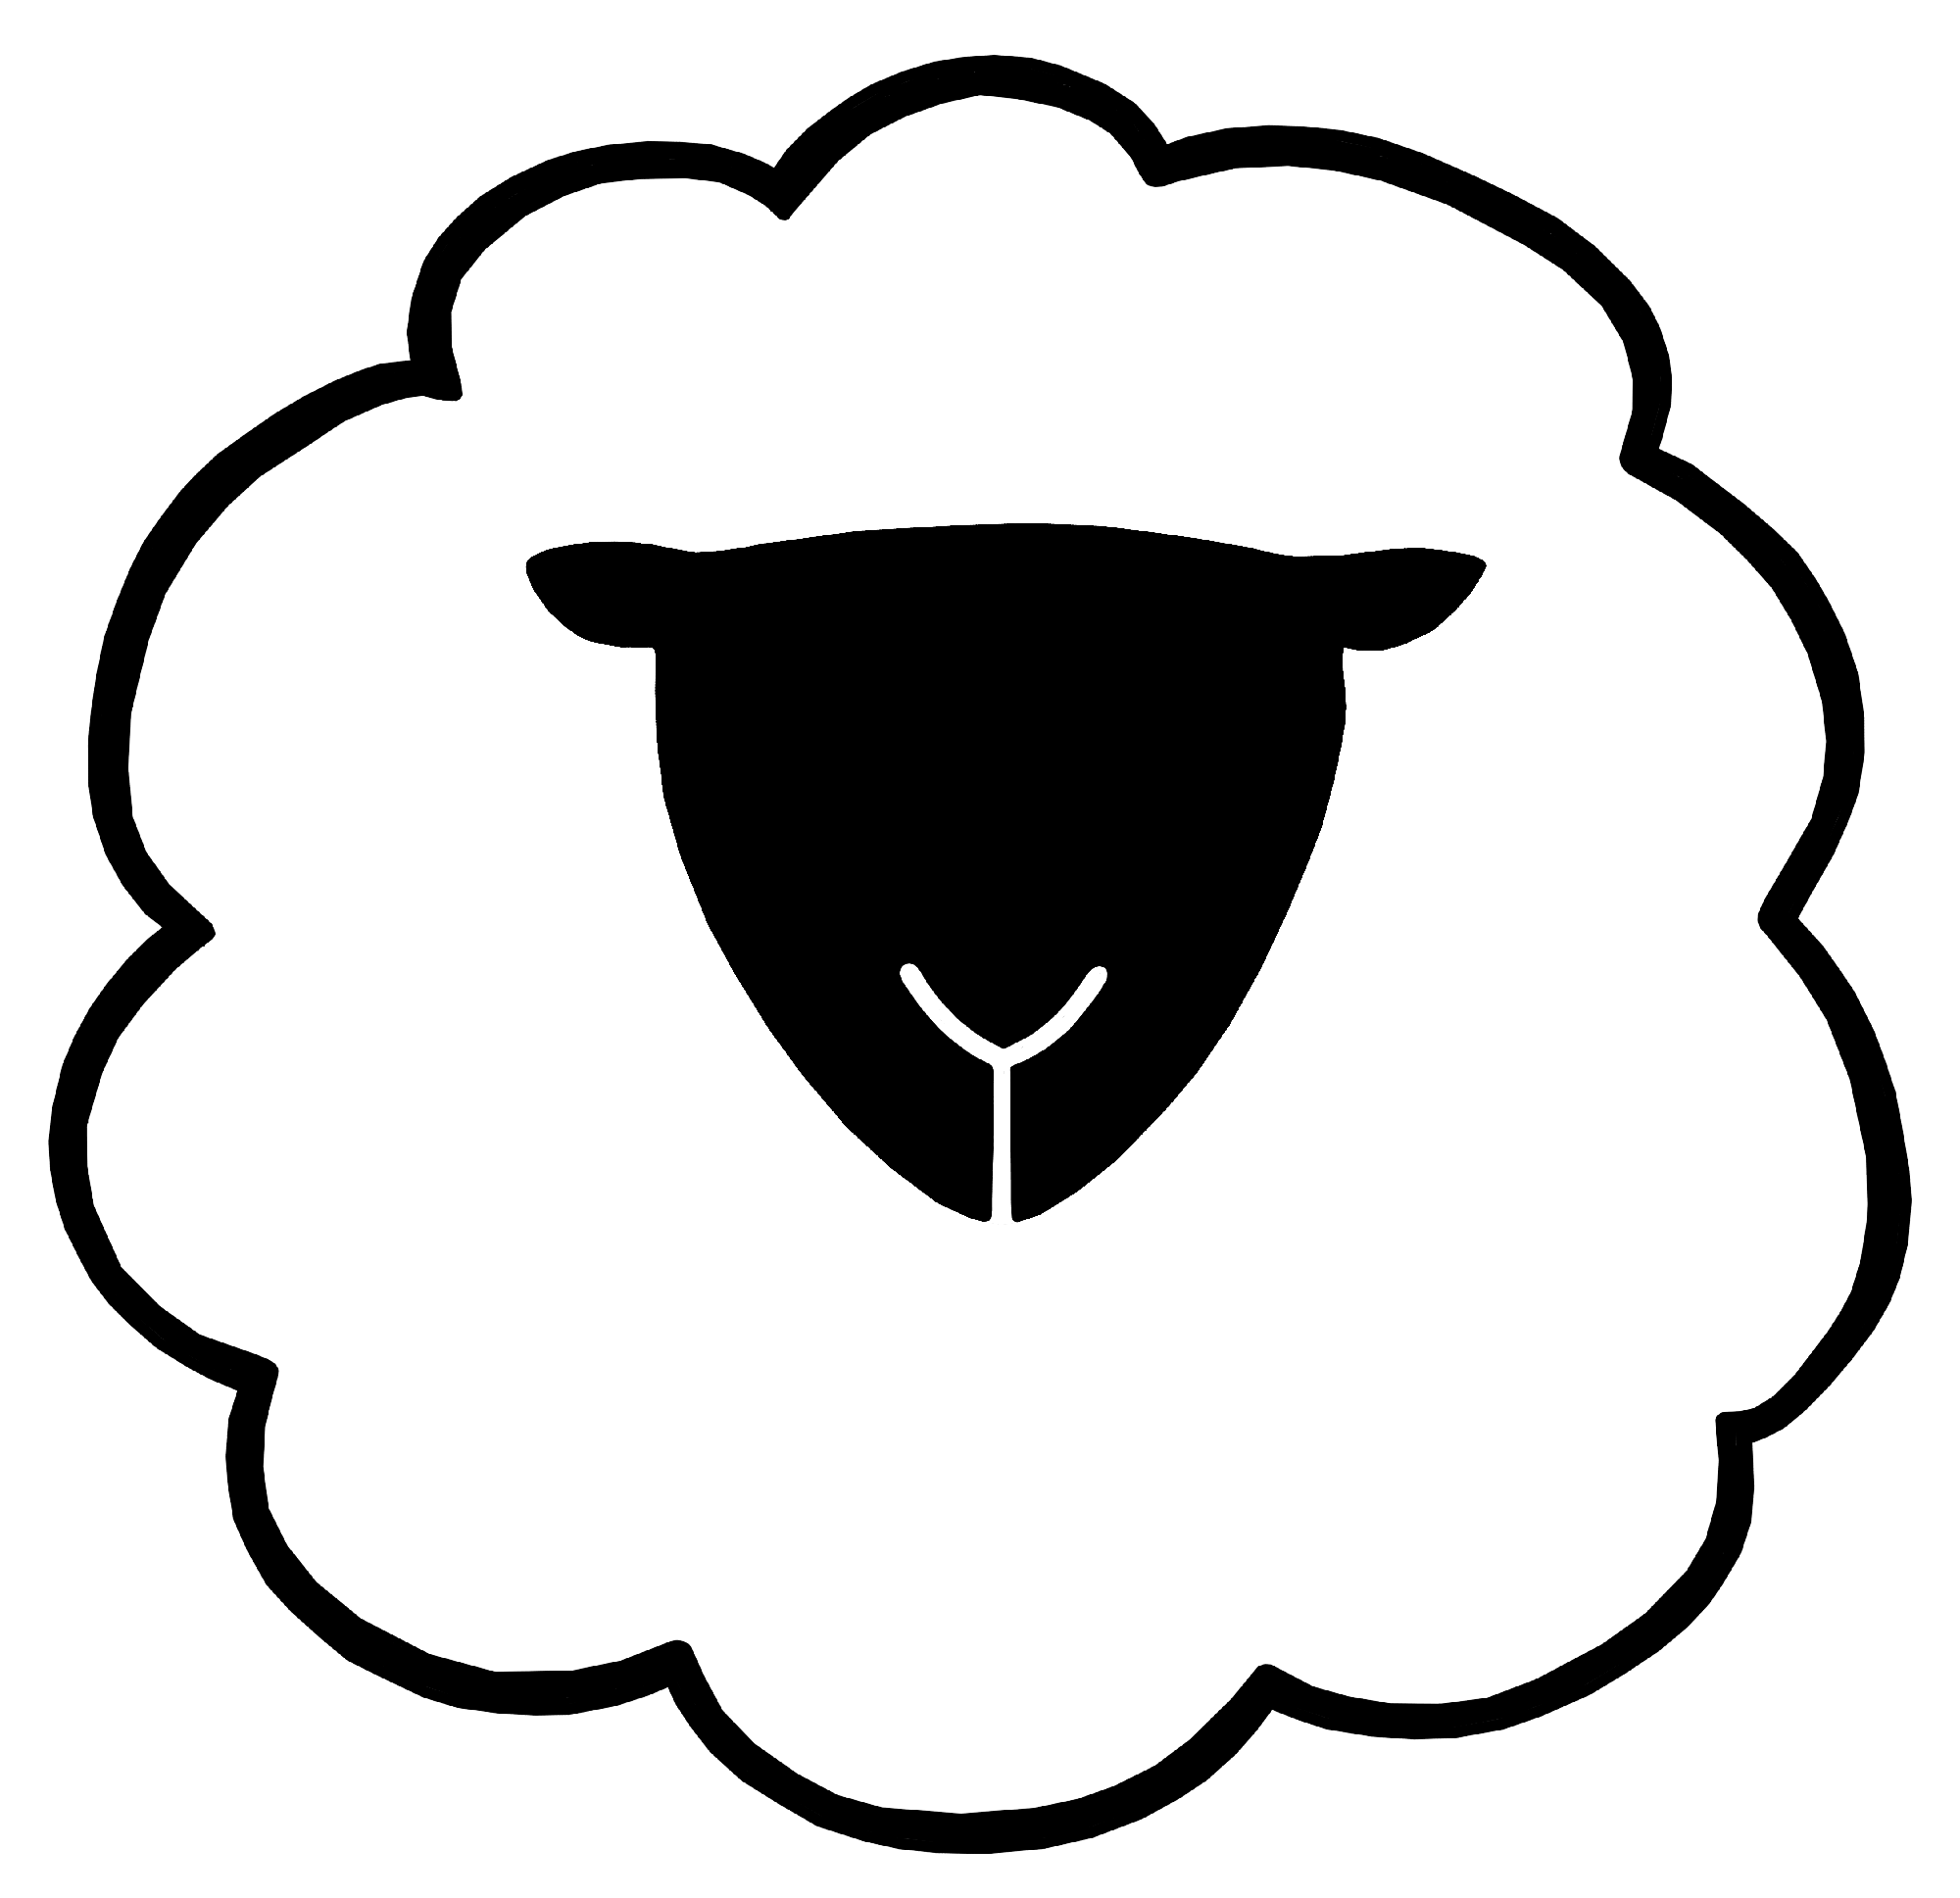 image of a white sheep with a black head